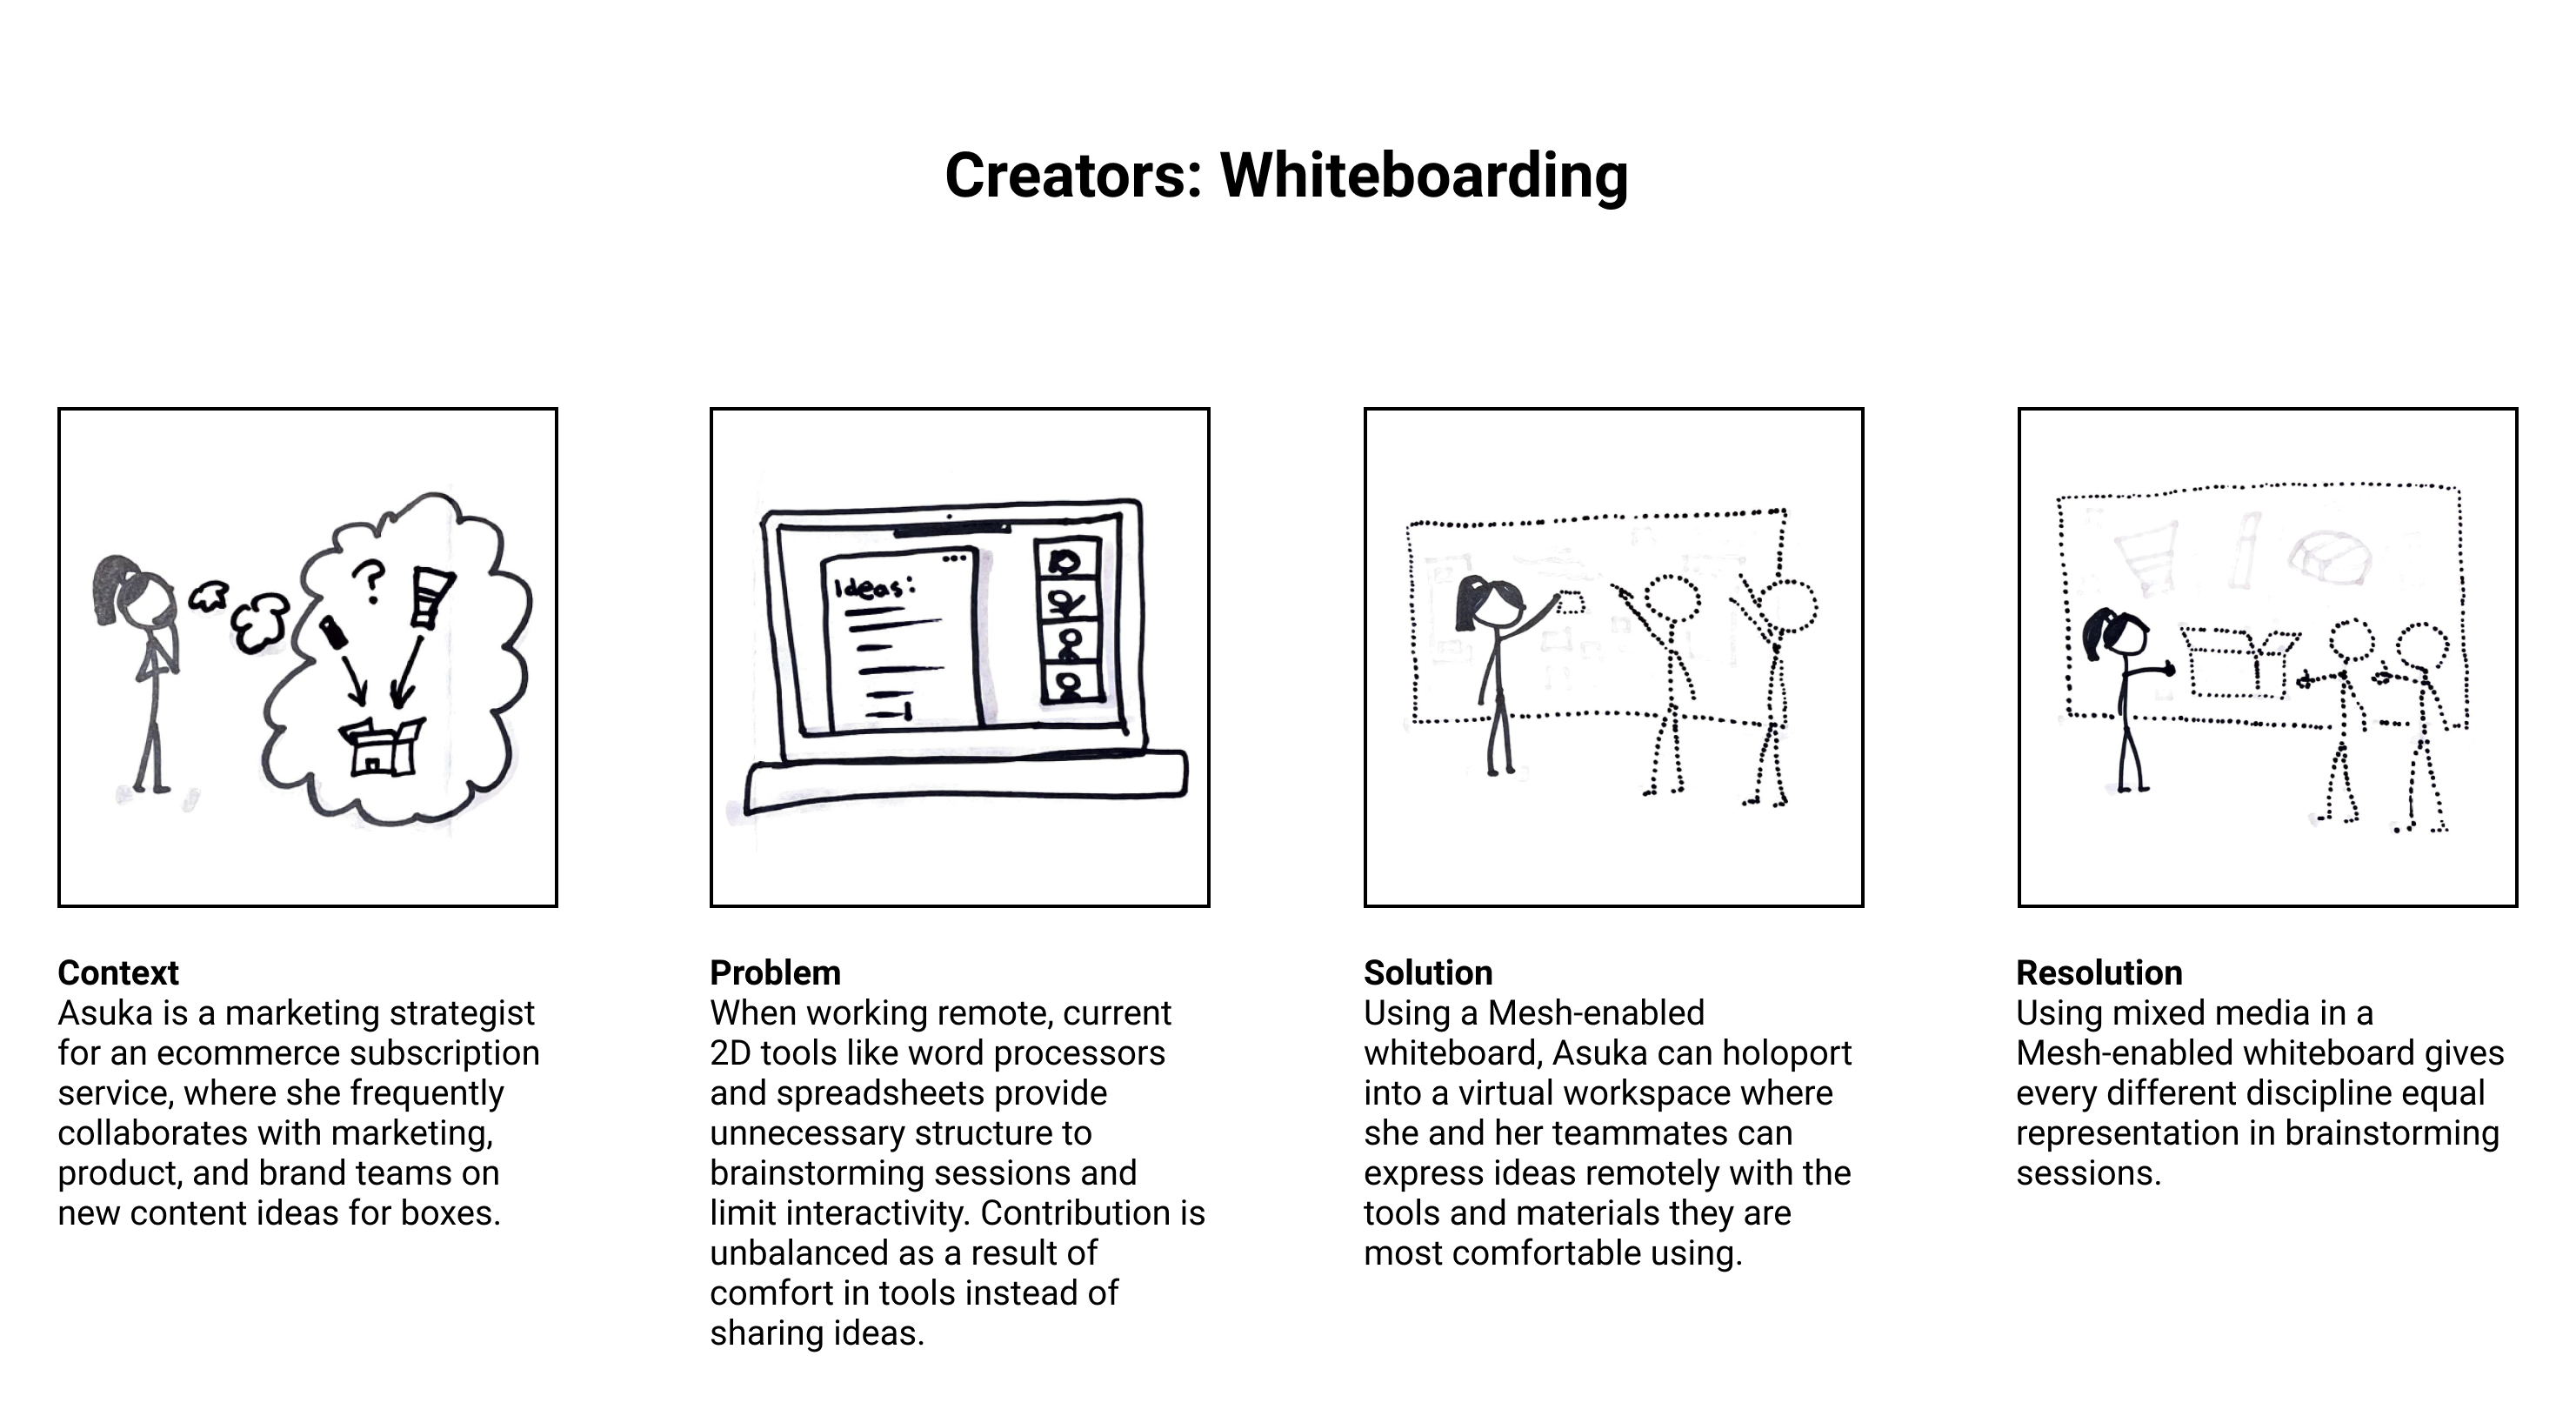 Creators can use MR to improve interactive brainstorming